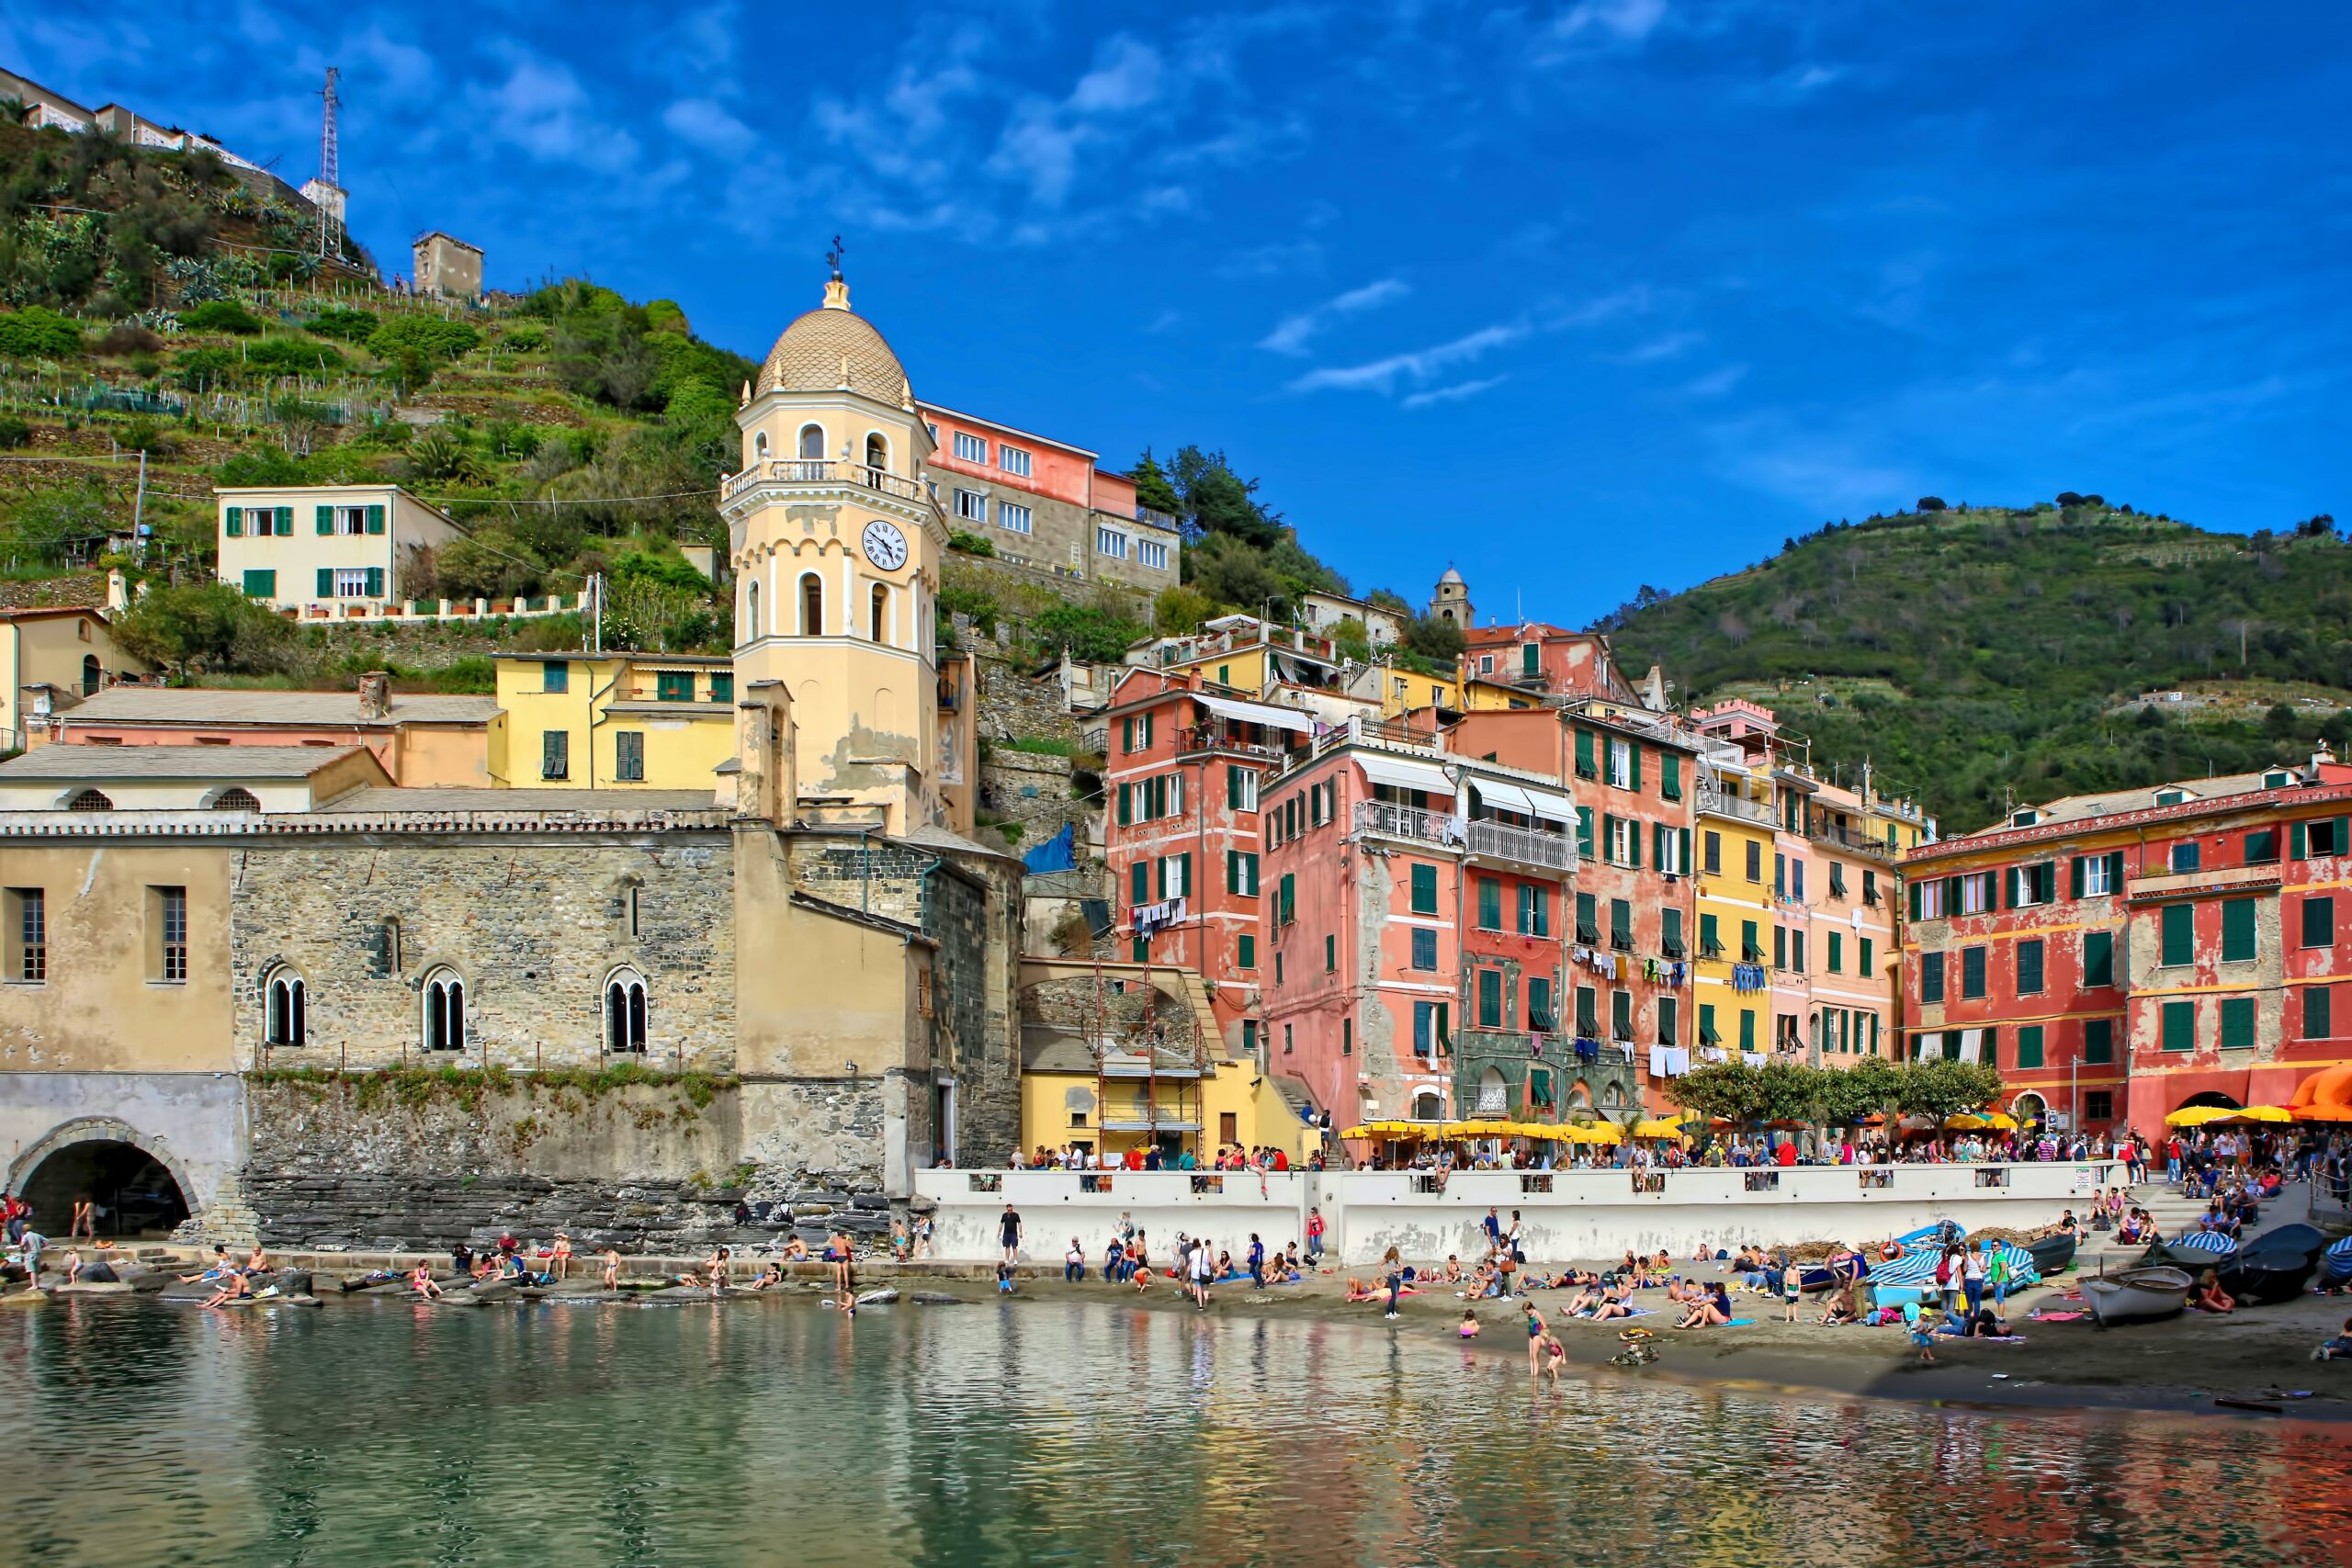 Colourful Italian town with people on the beach and a clock tower. This is Vernazza, one of the 5 towns of cinque terre.